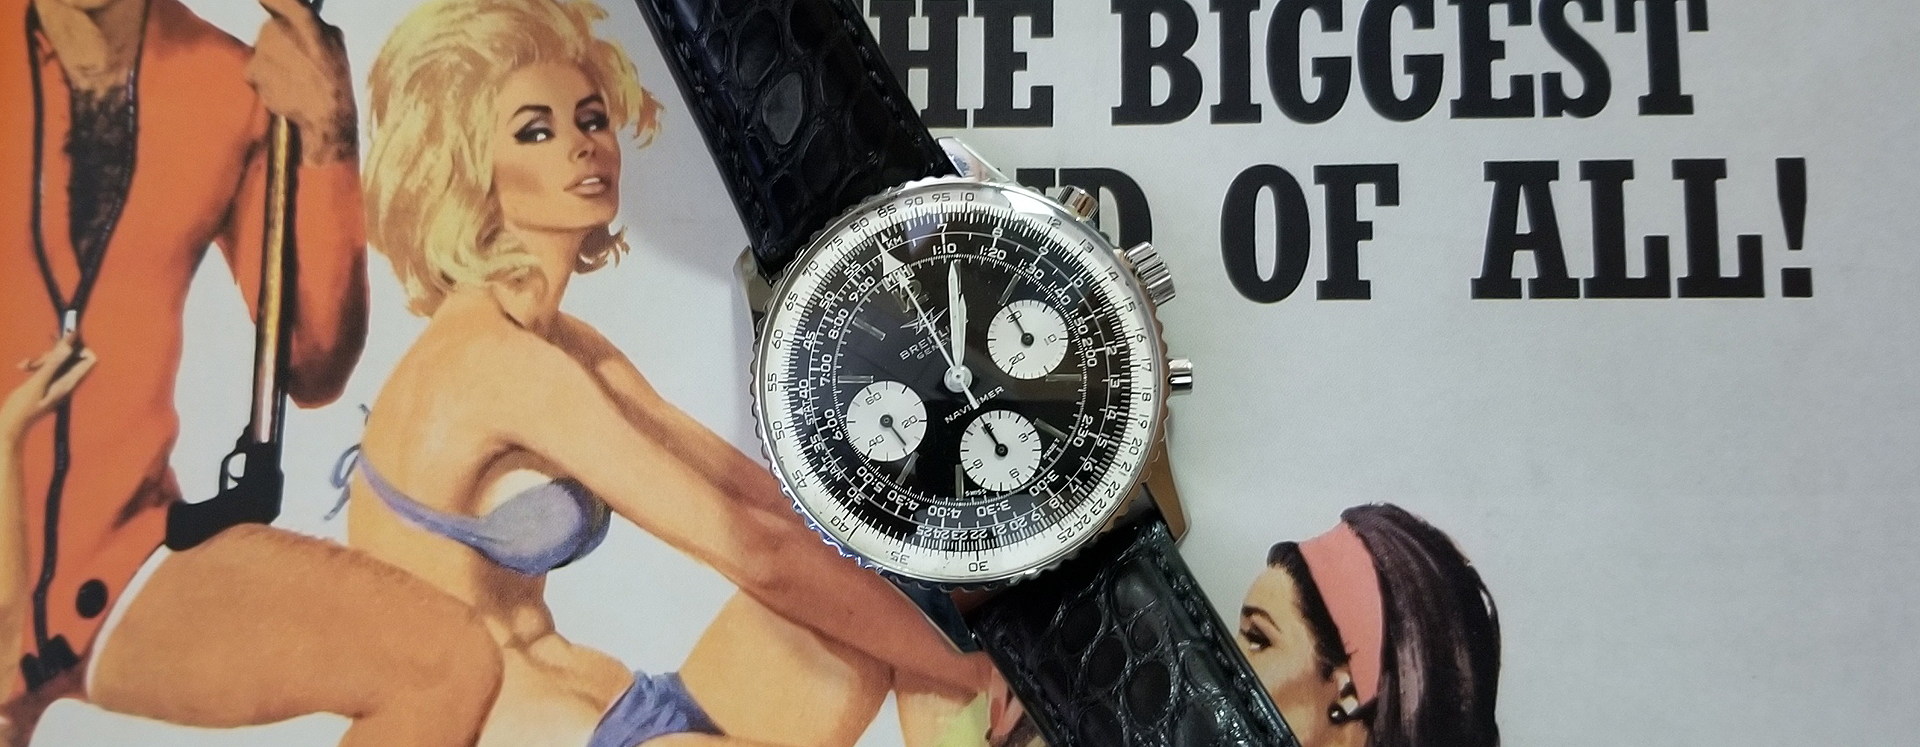 Breitling Navitimer Reference 806 W2W Blog